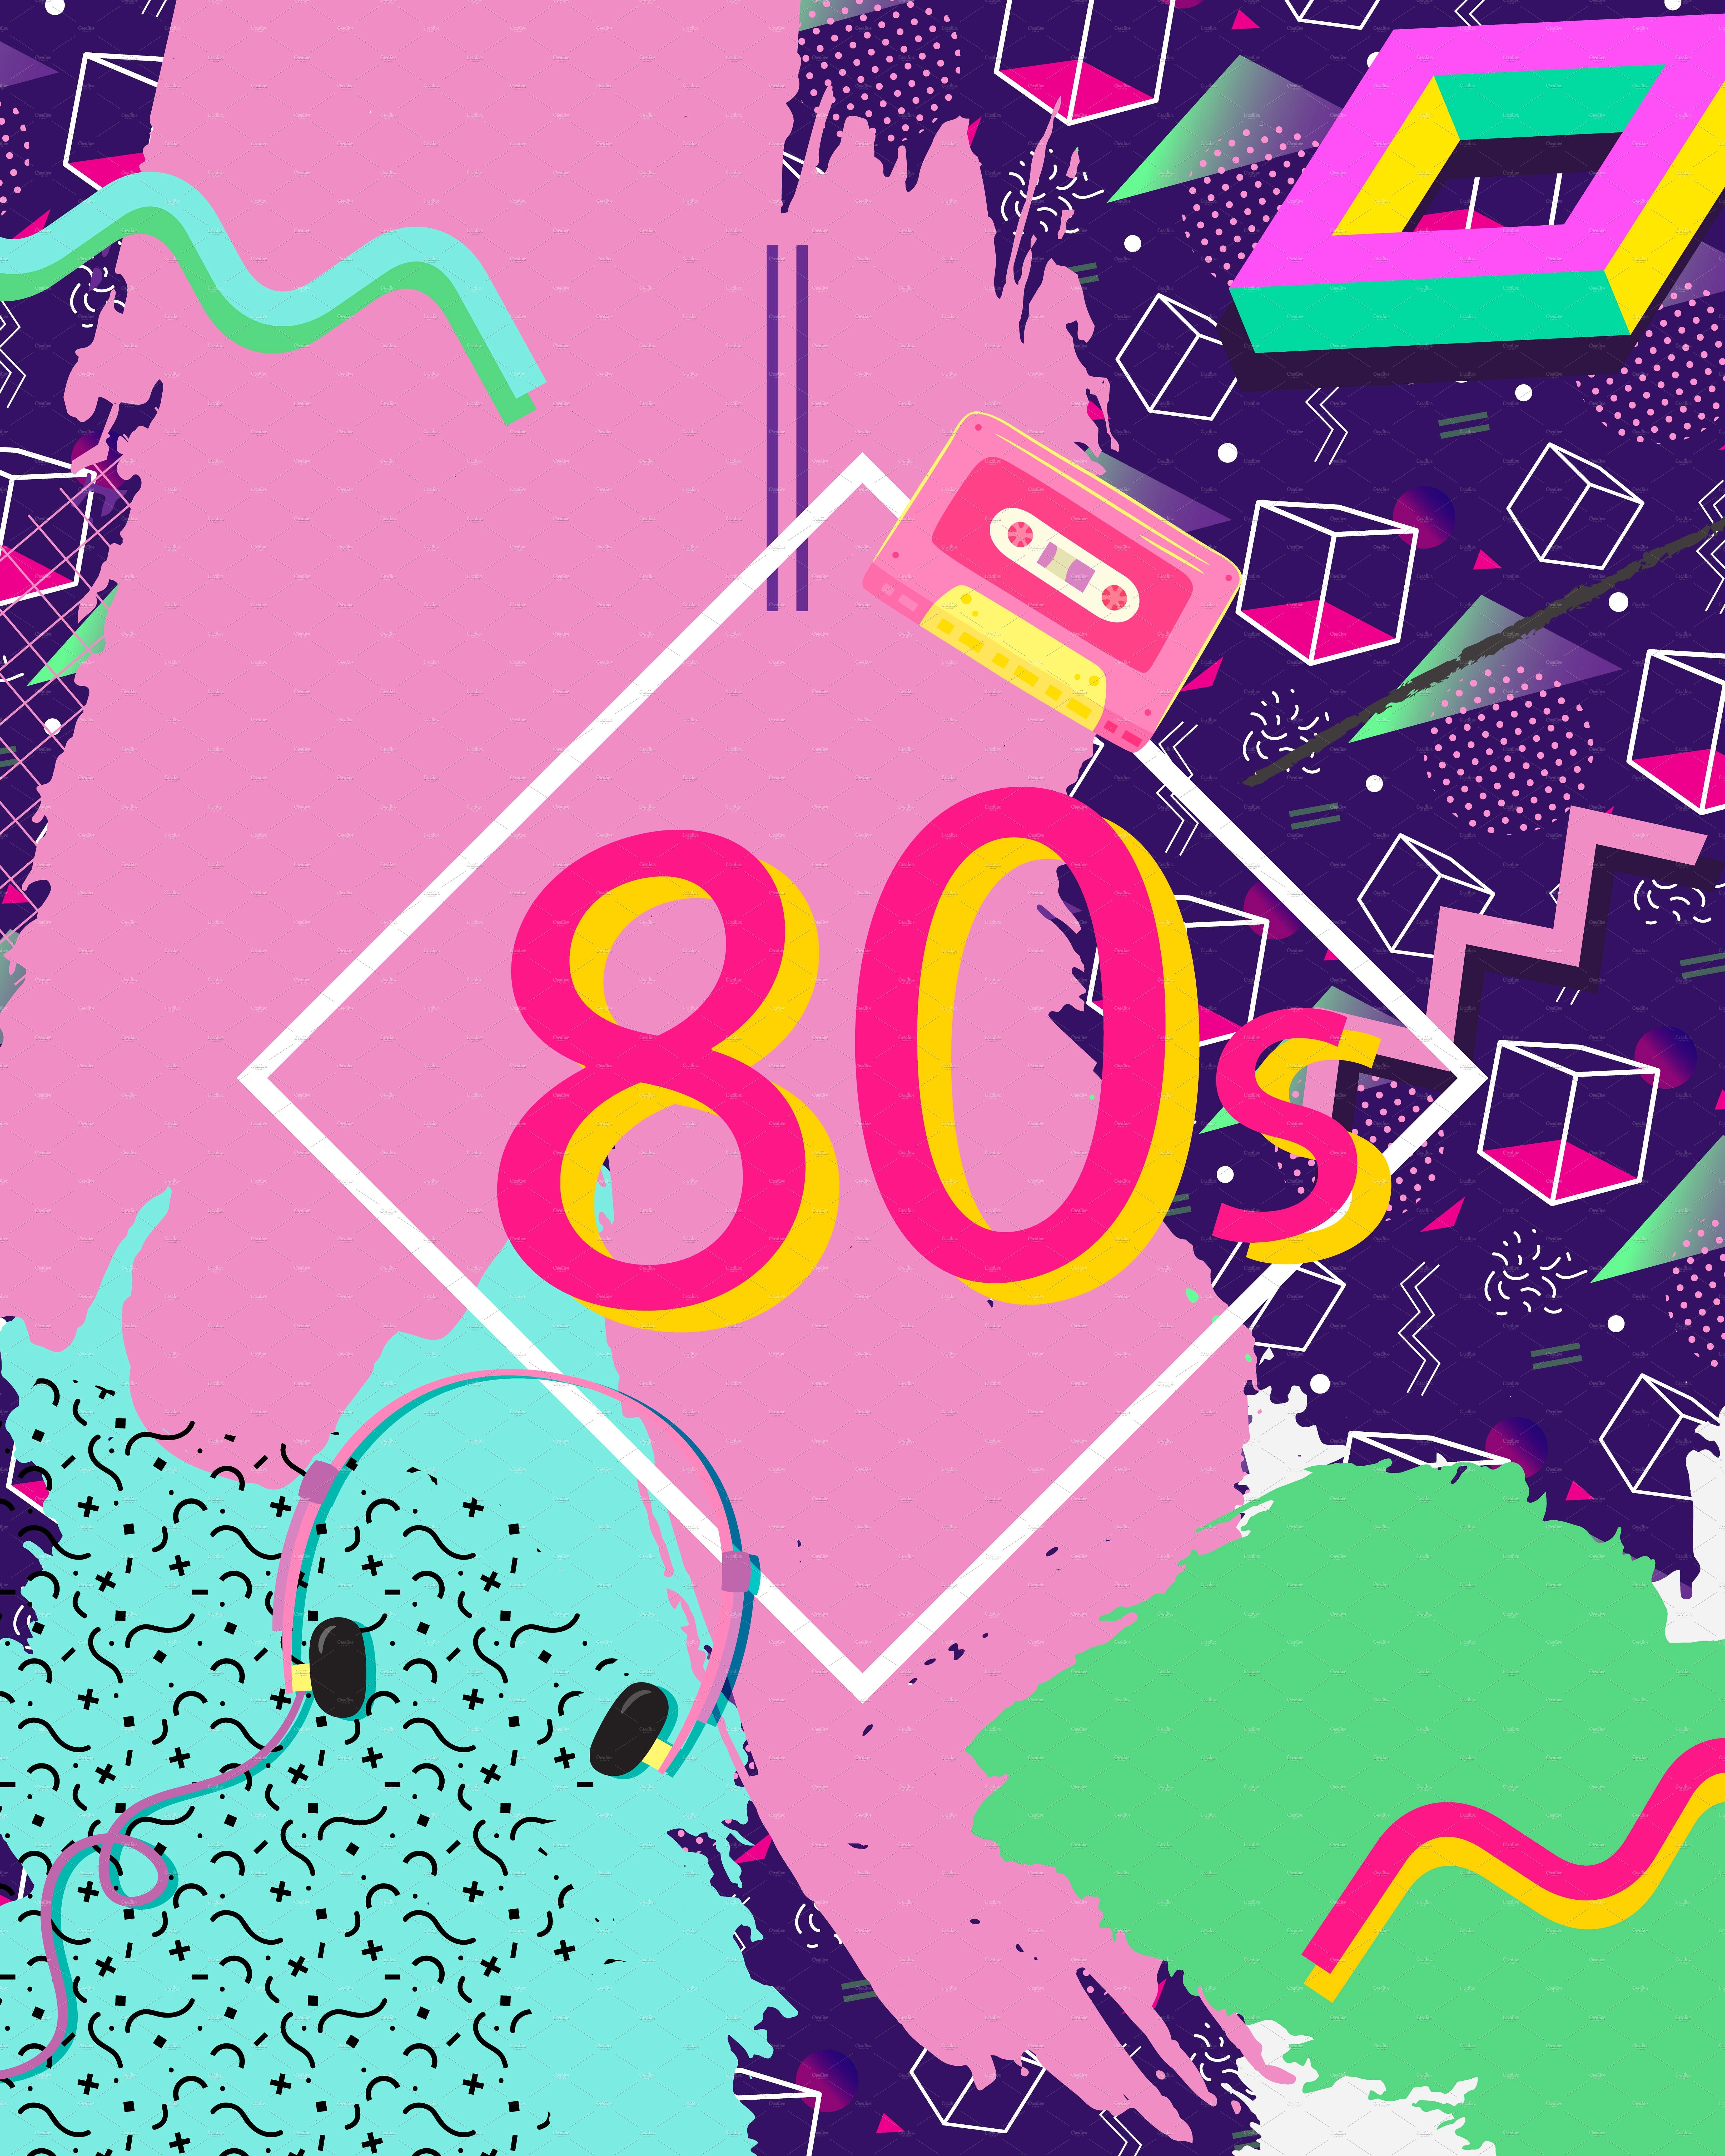 Colourful Eighties background. iPhone wallpaper pattern, 80s